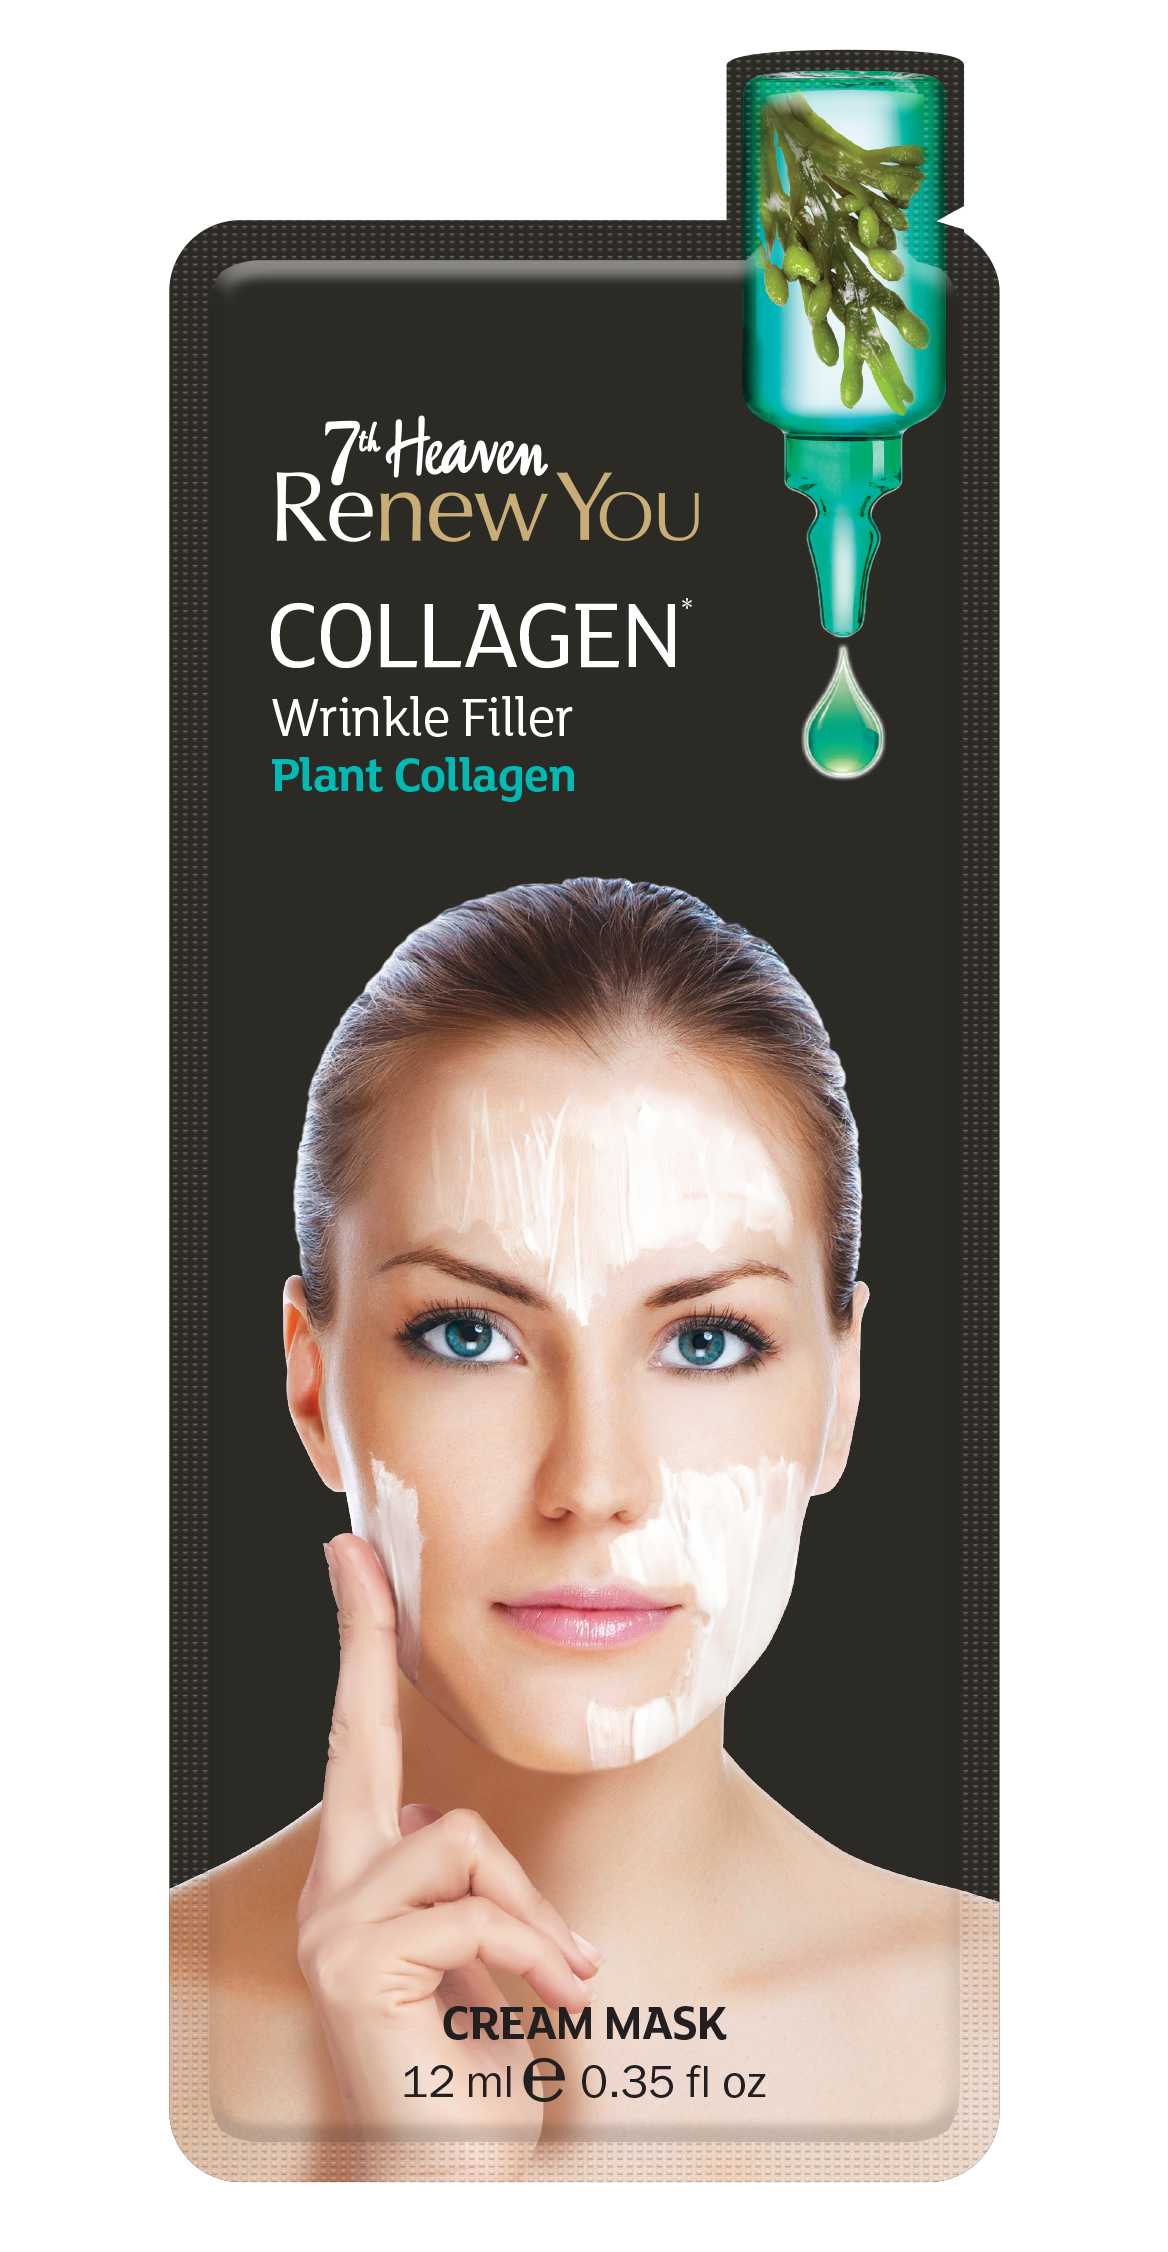 th Heaven Renew You Collagen* Cream Mask with Active Pelvetia Seaweed to Boost Collagen Production for Rehydrated and Radiant Skin - Ideal for All Skin Types